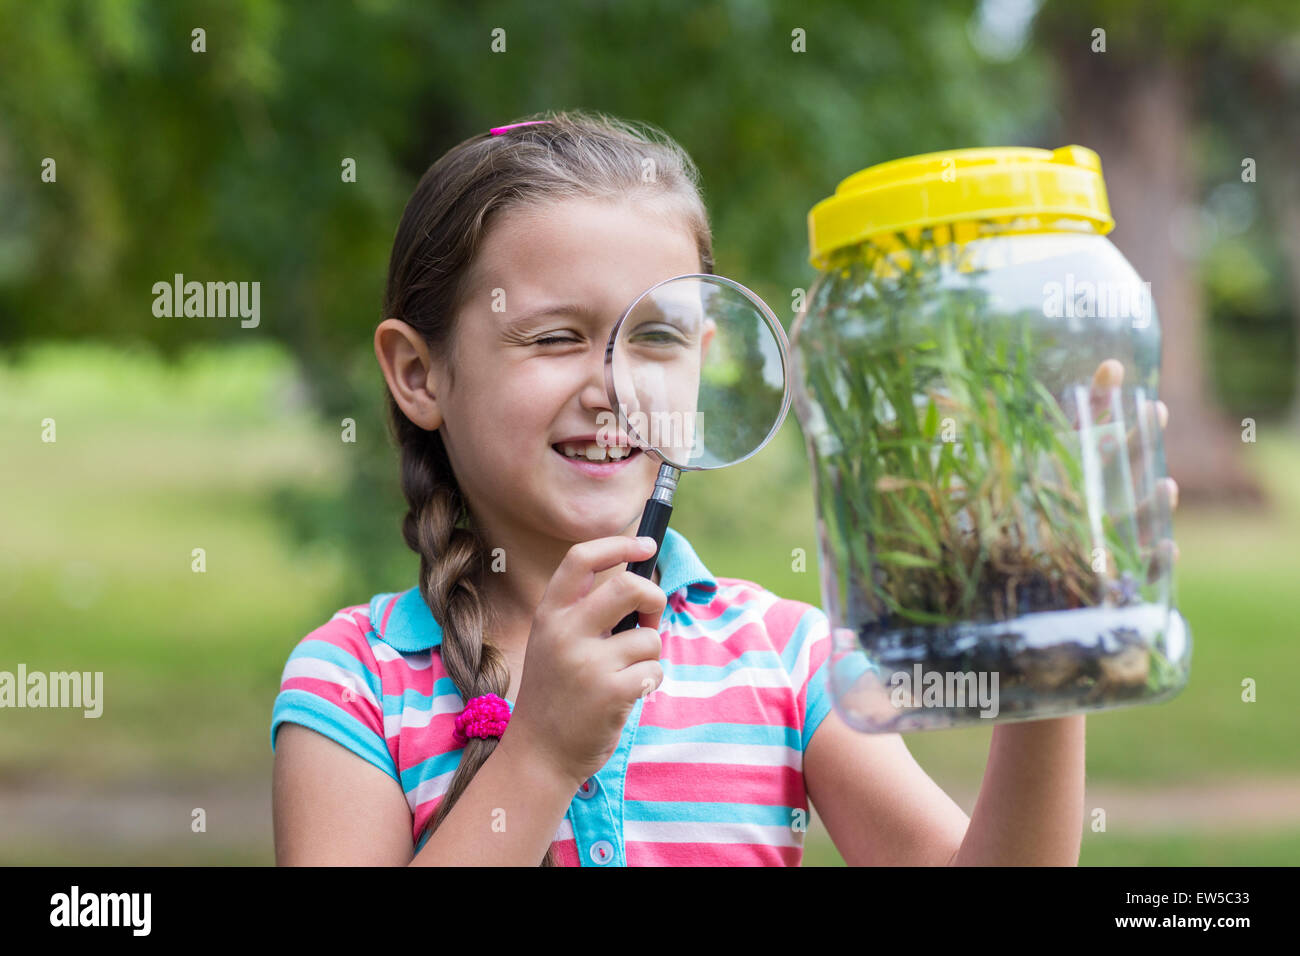 Curious little girl looking at jar Stock Photo